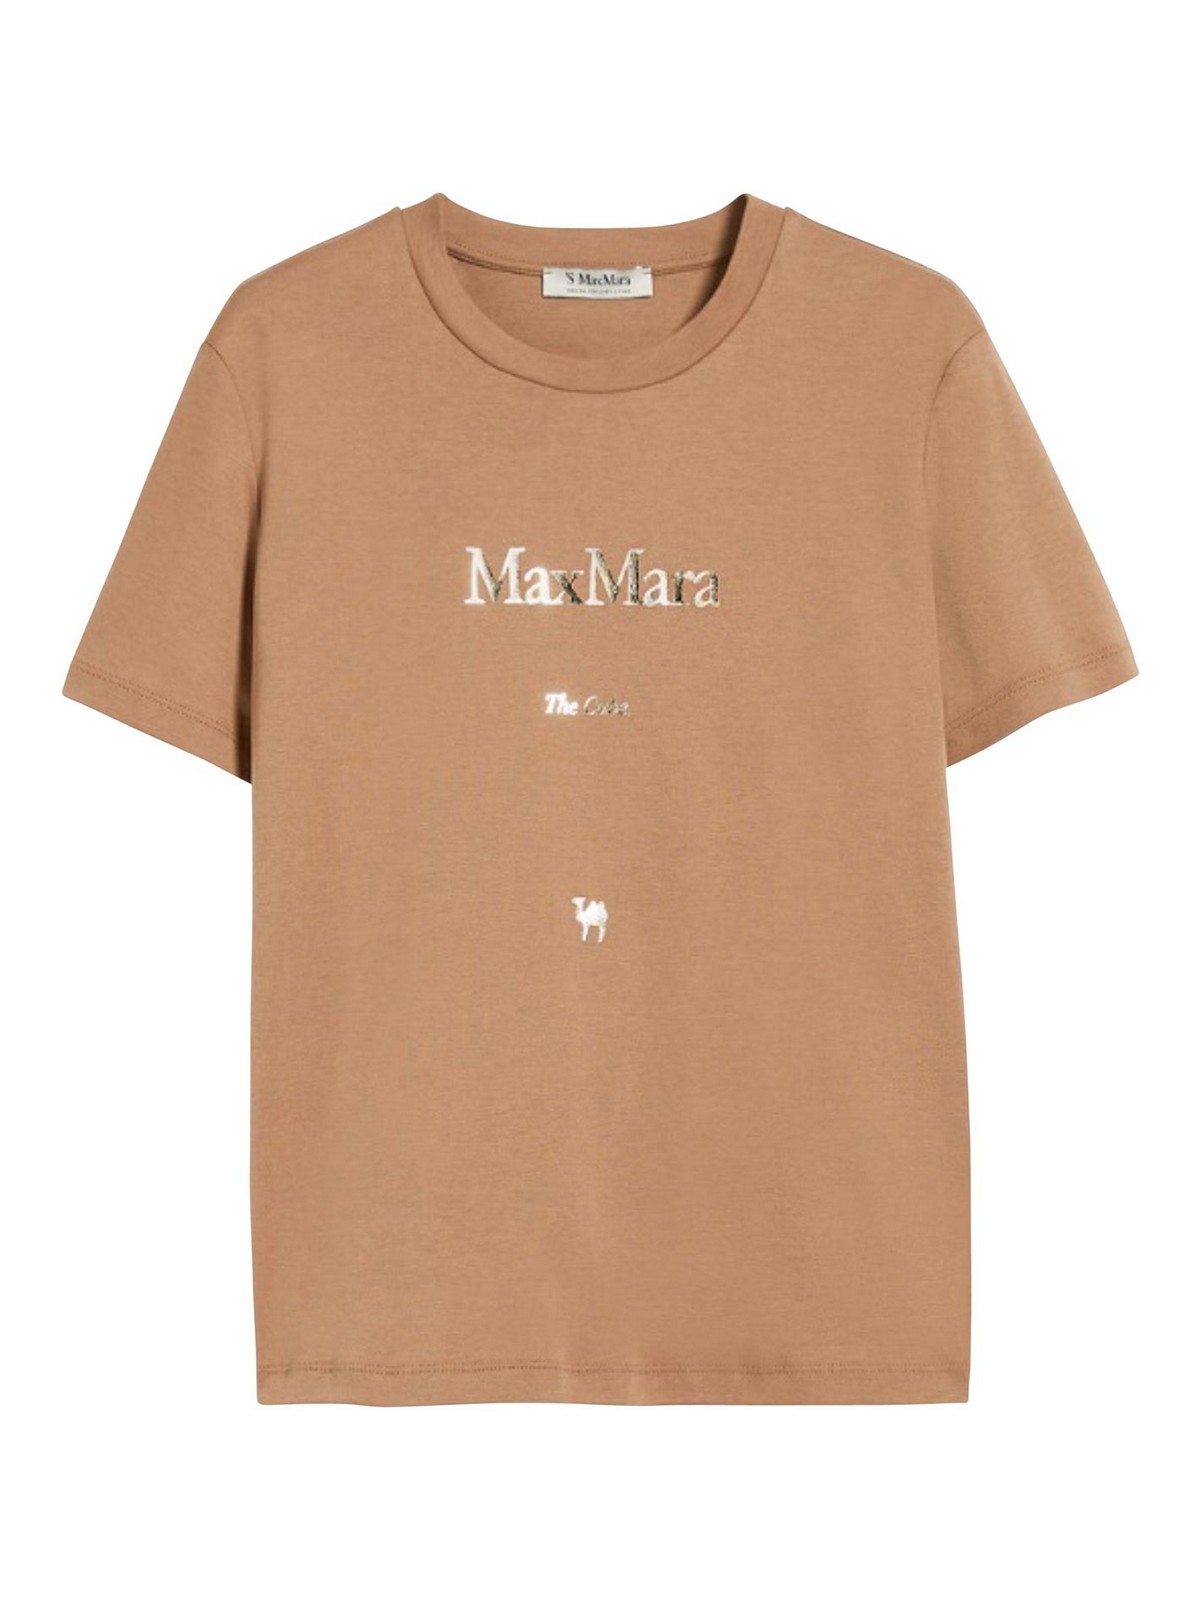 Max Mara Jersey T-shirt With Print In Camel